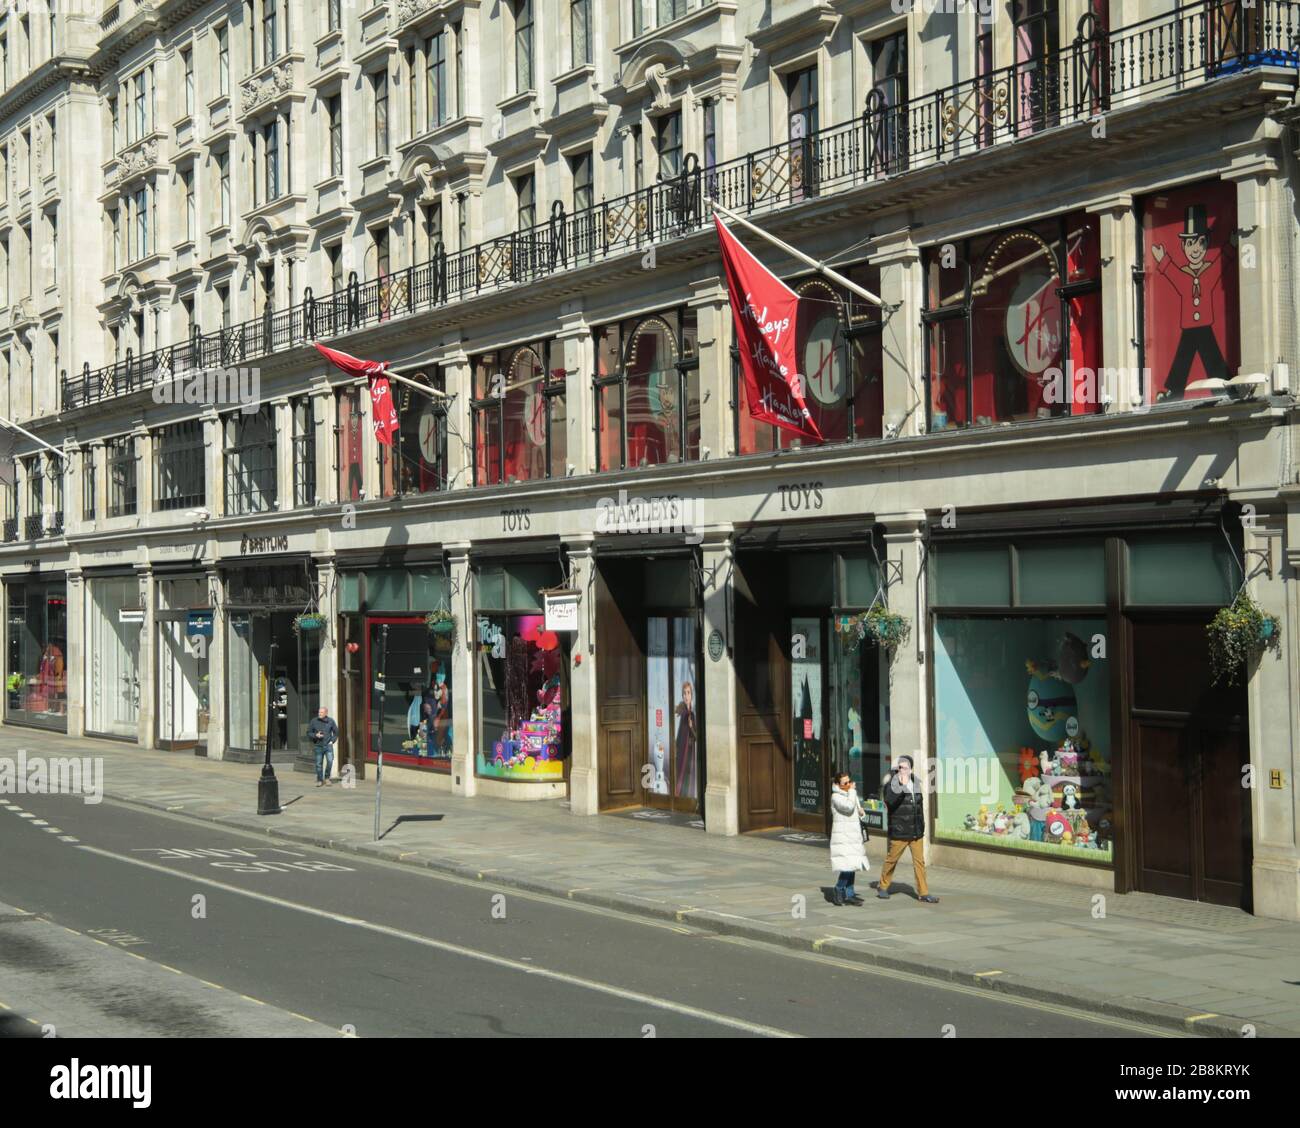 London UK Sunday 22 March 2020 Regent Street on a lovey sunny day in London, usually teemingly with tourist and shoppers, resembled a ghost street today, as covid -19 is taking its toll on the British economy.Paul Quezada-Neiman/Alamy Live News Credit: Paul Quezada-Neiman/Alamy Live News Stock Photo